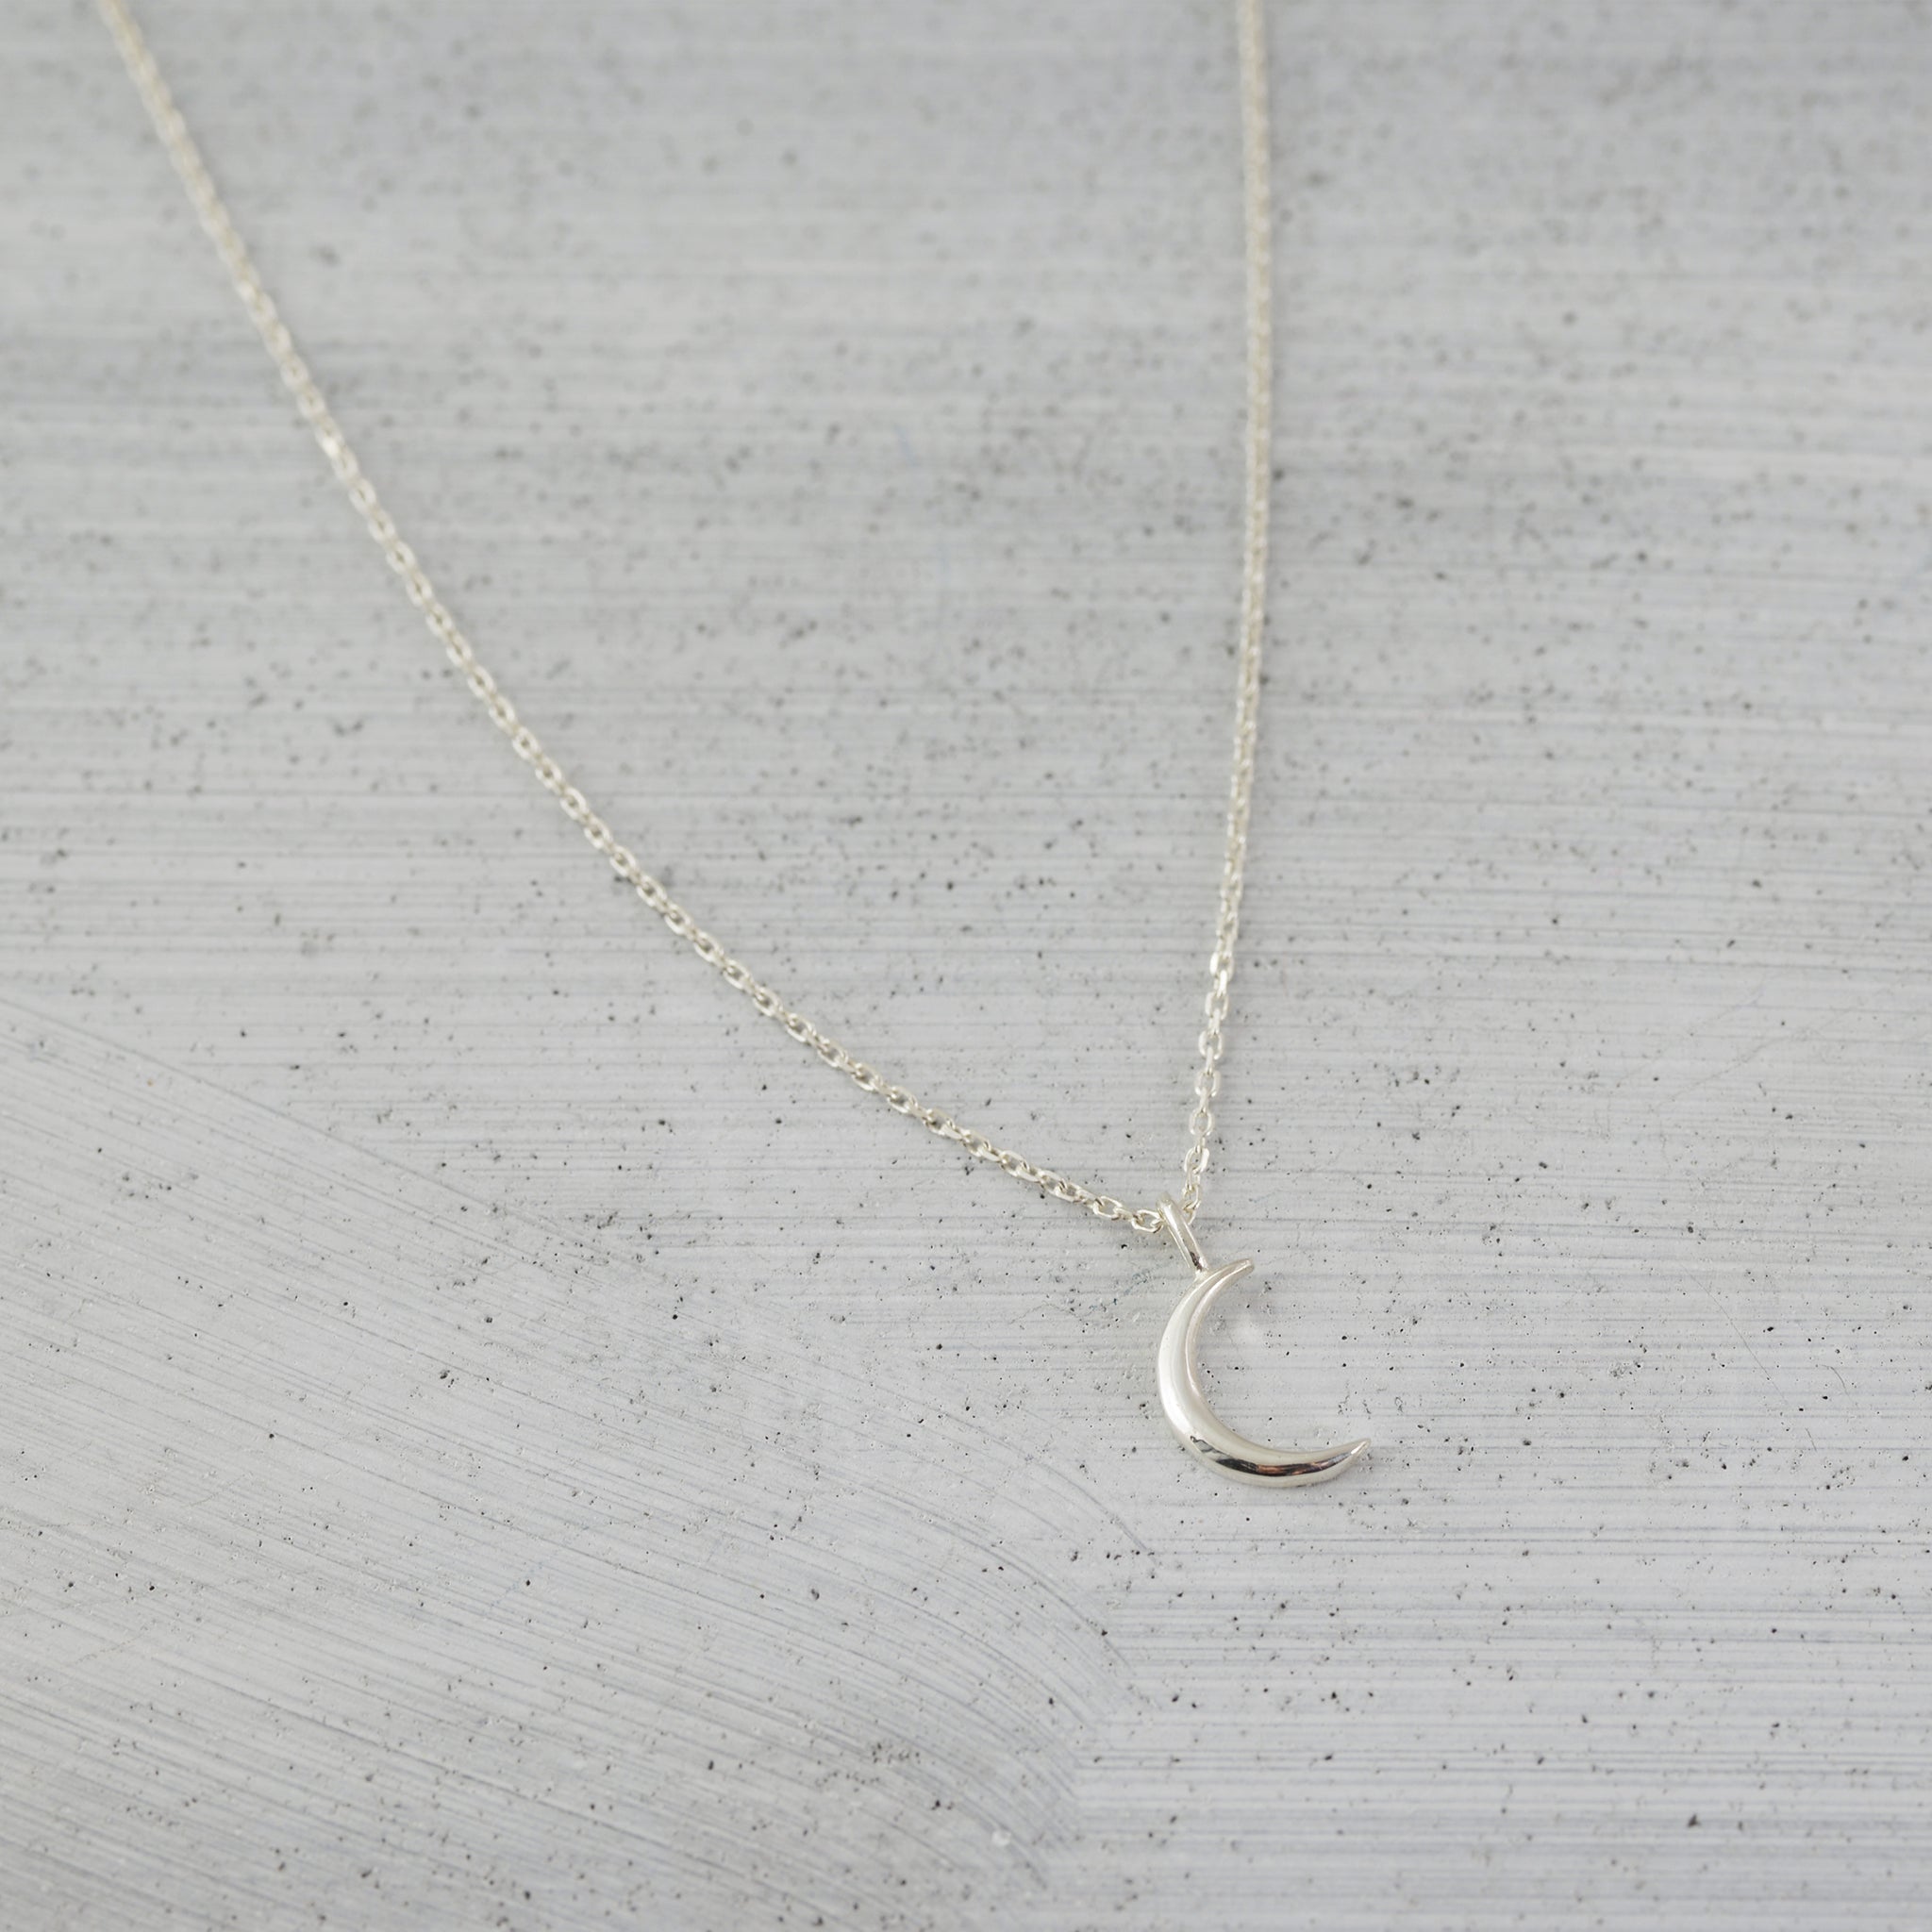 New moon Necklace - Silver